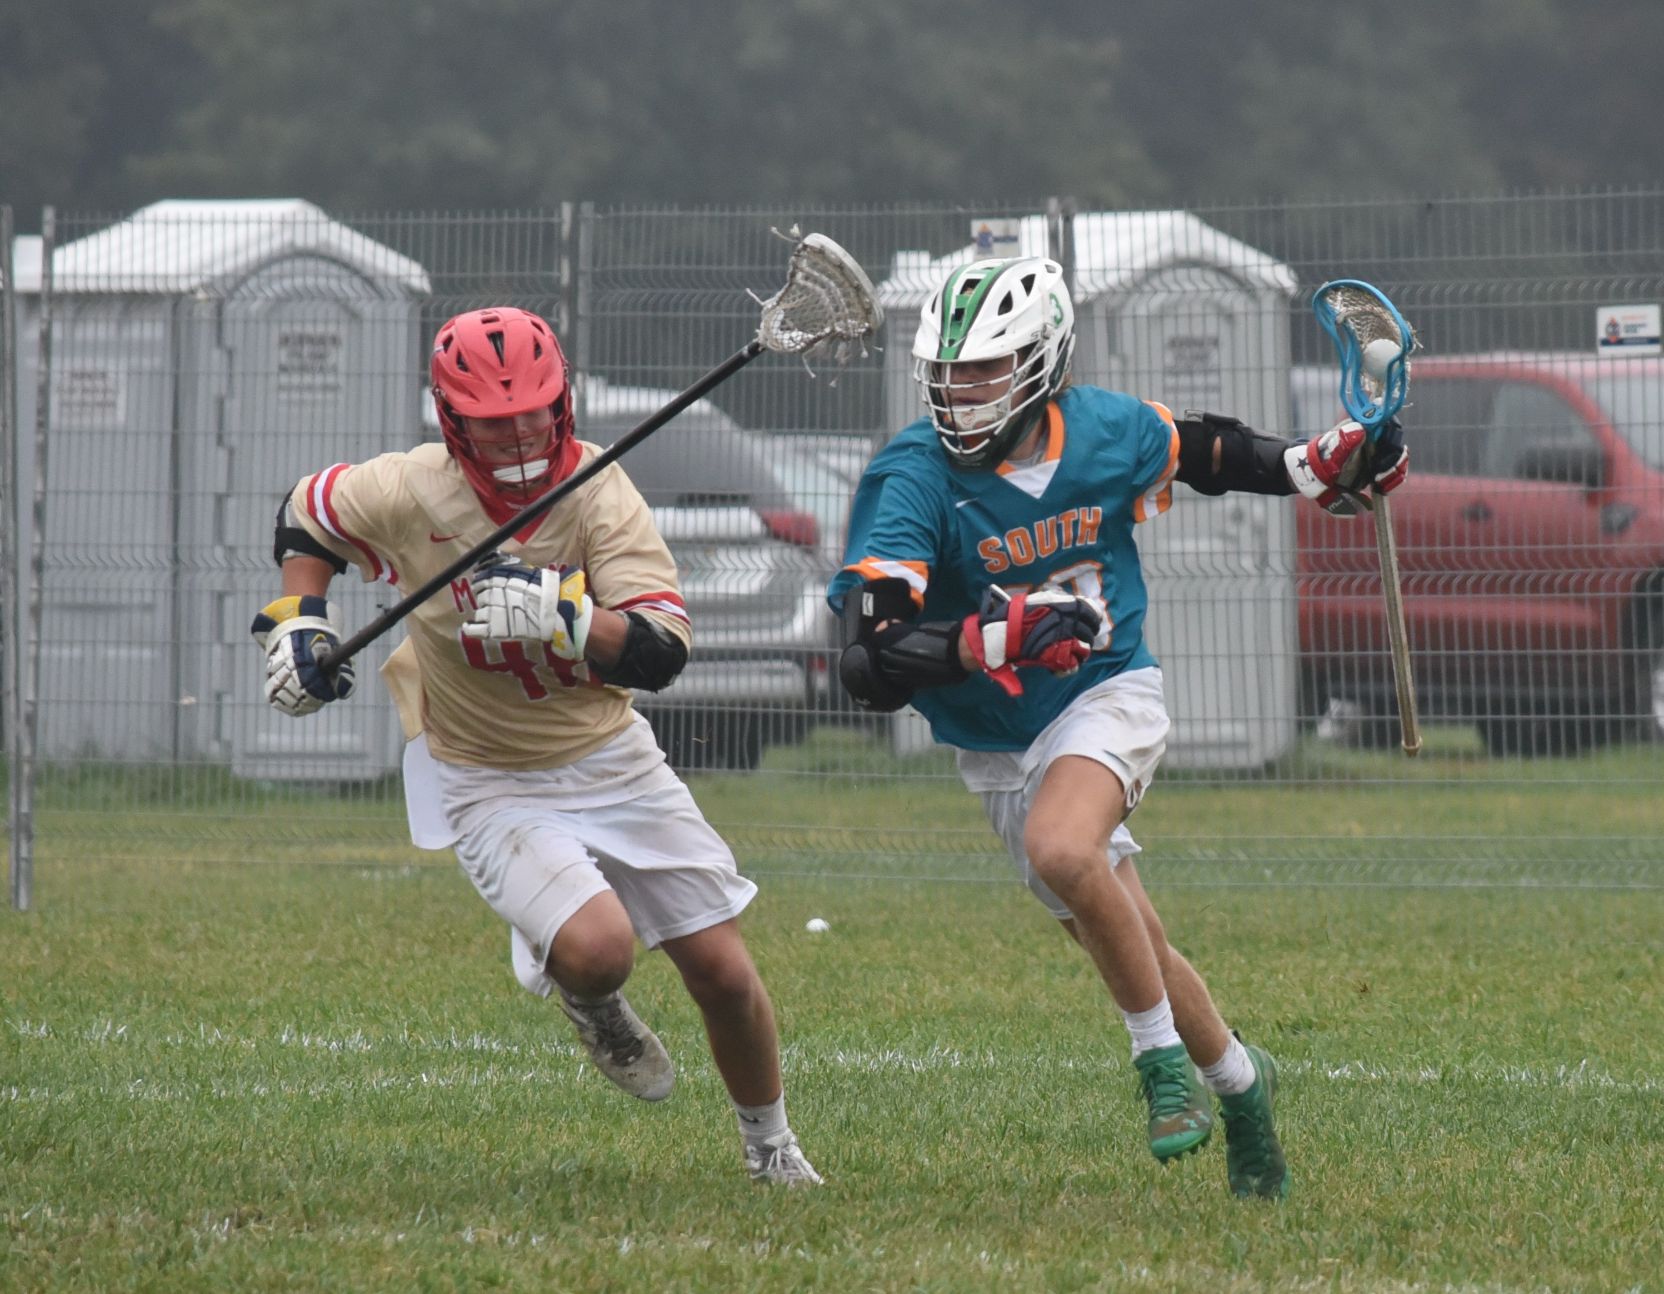 Hill Plunket, 2023 Standout Lacrosse Player at The National All Star Games in Baltimore, Maryland